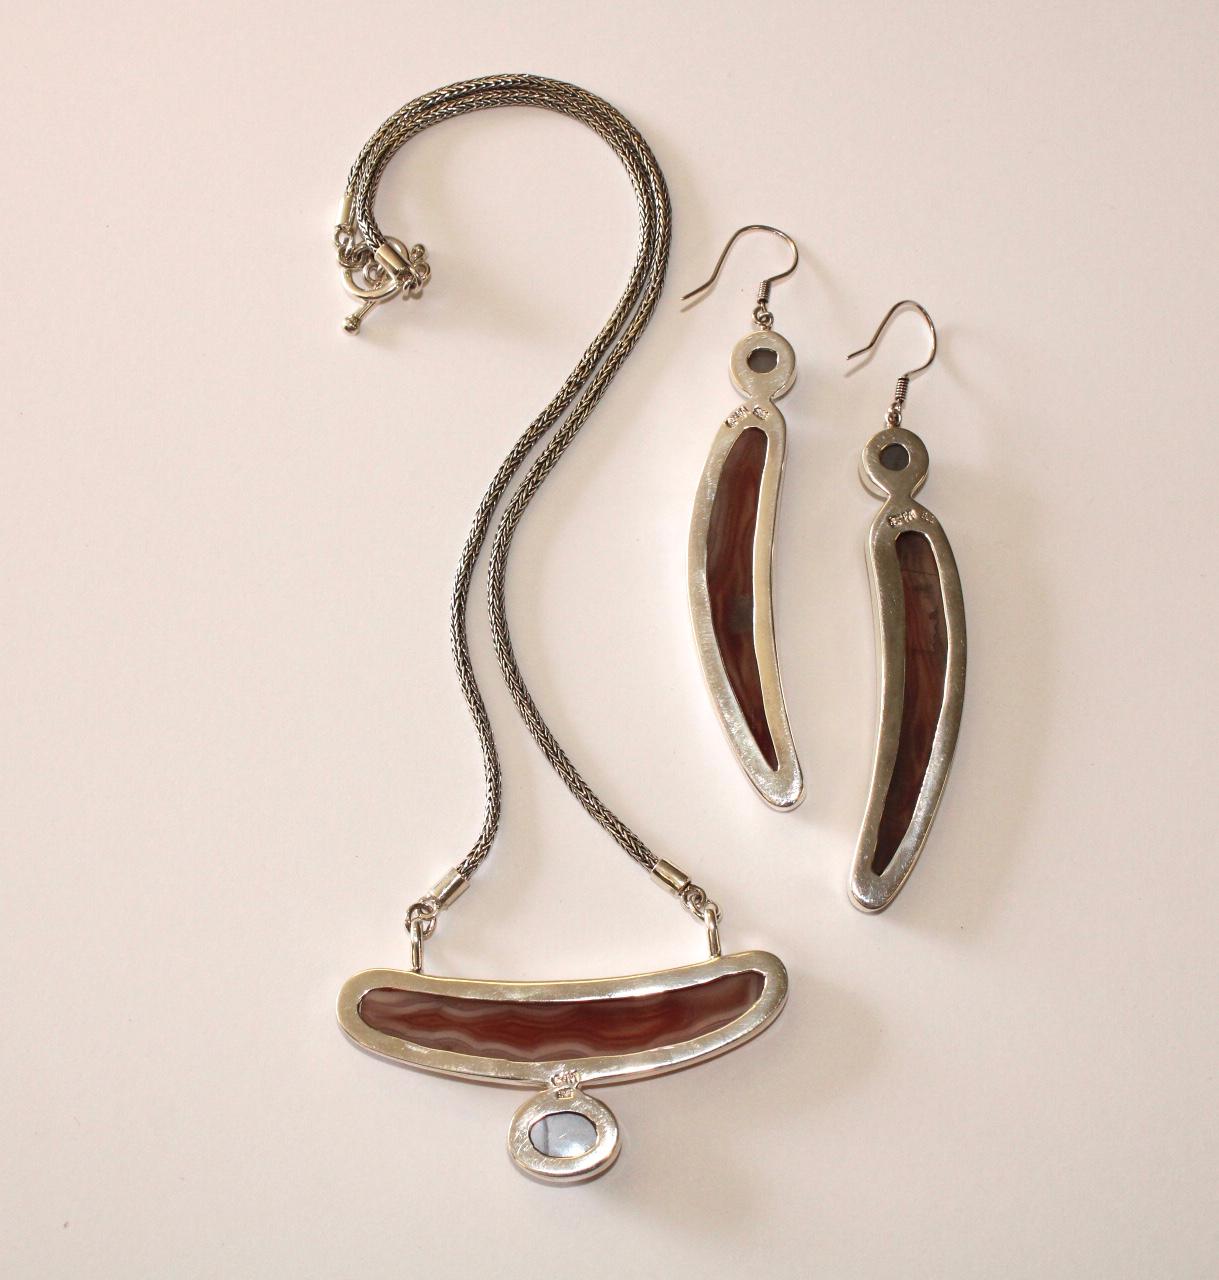 We collaborate with a master silversmith in Kotagede, Java, the heart of the silver industry in Indonesia to create these one of kind pieces.  This dramatic set features a rare pink translucent banded agate with a moonstone accent stone. 